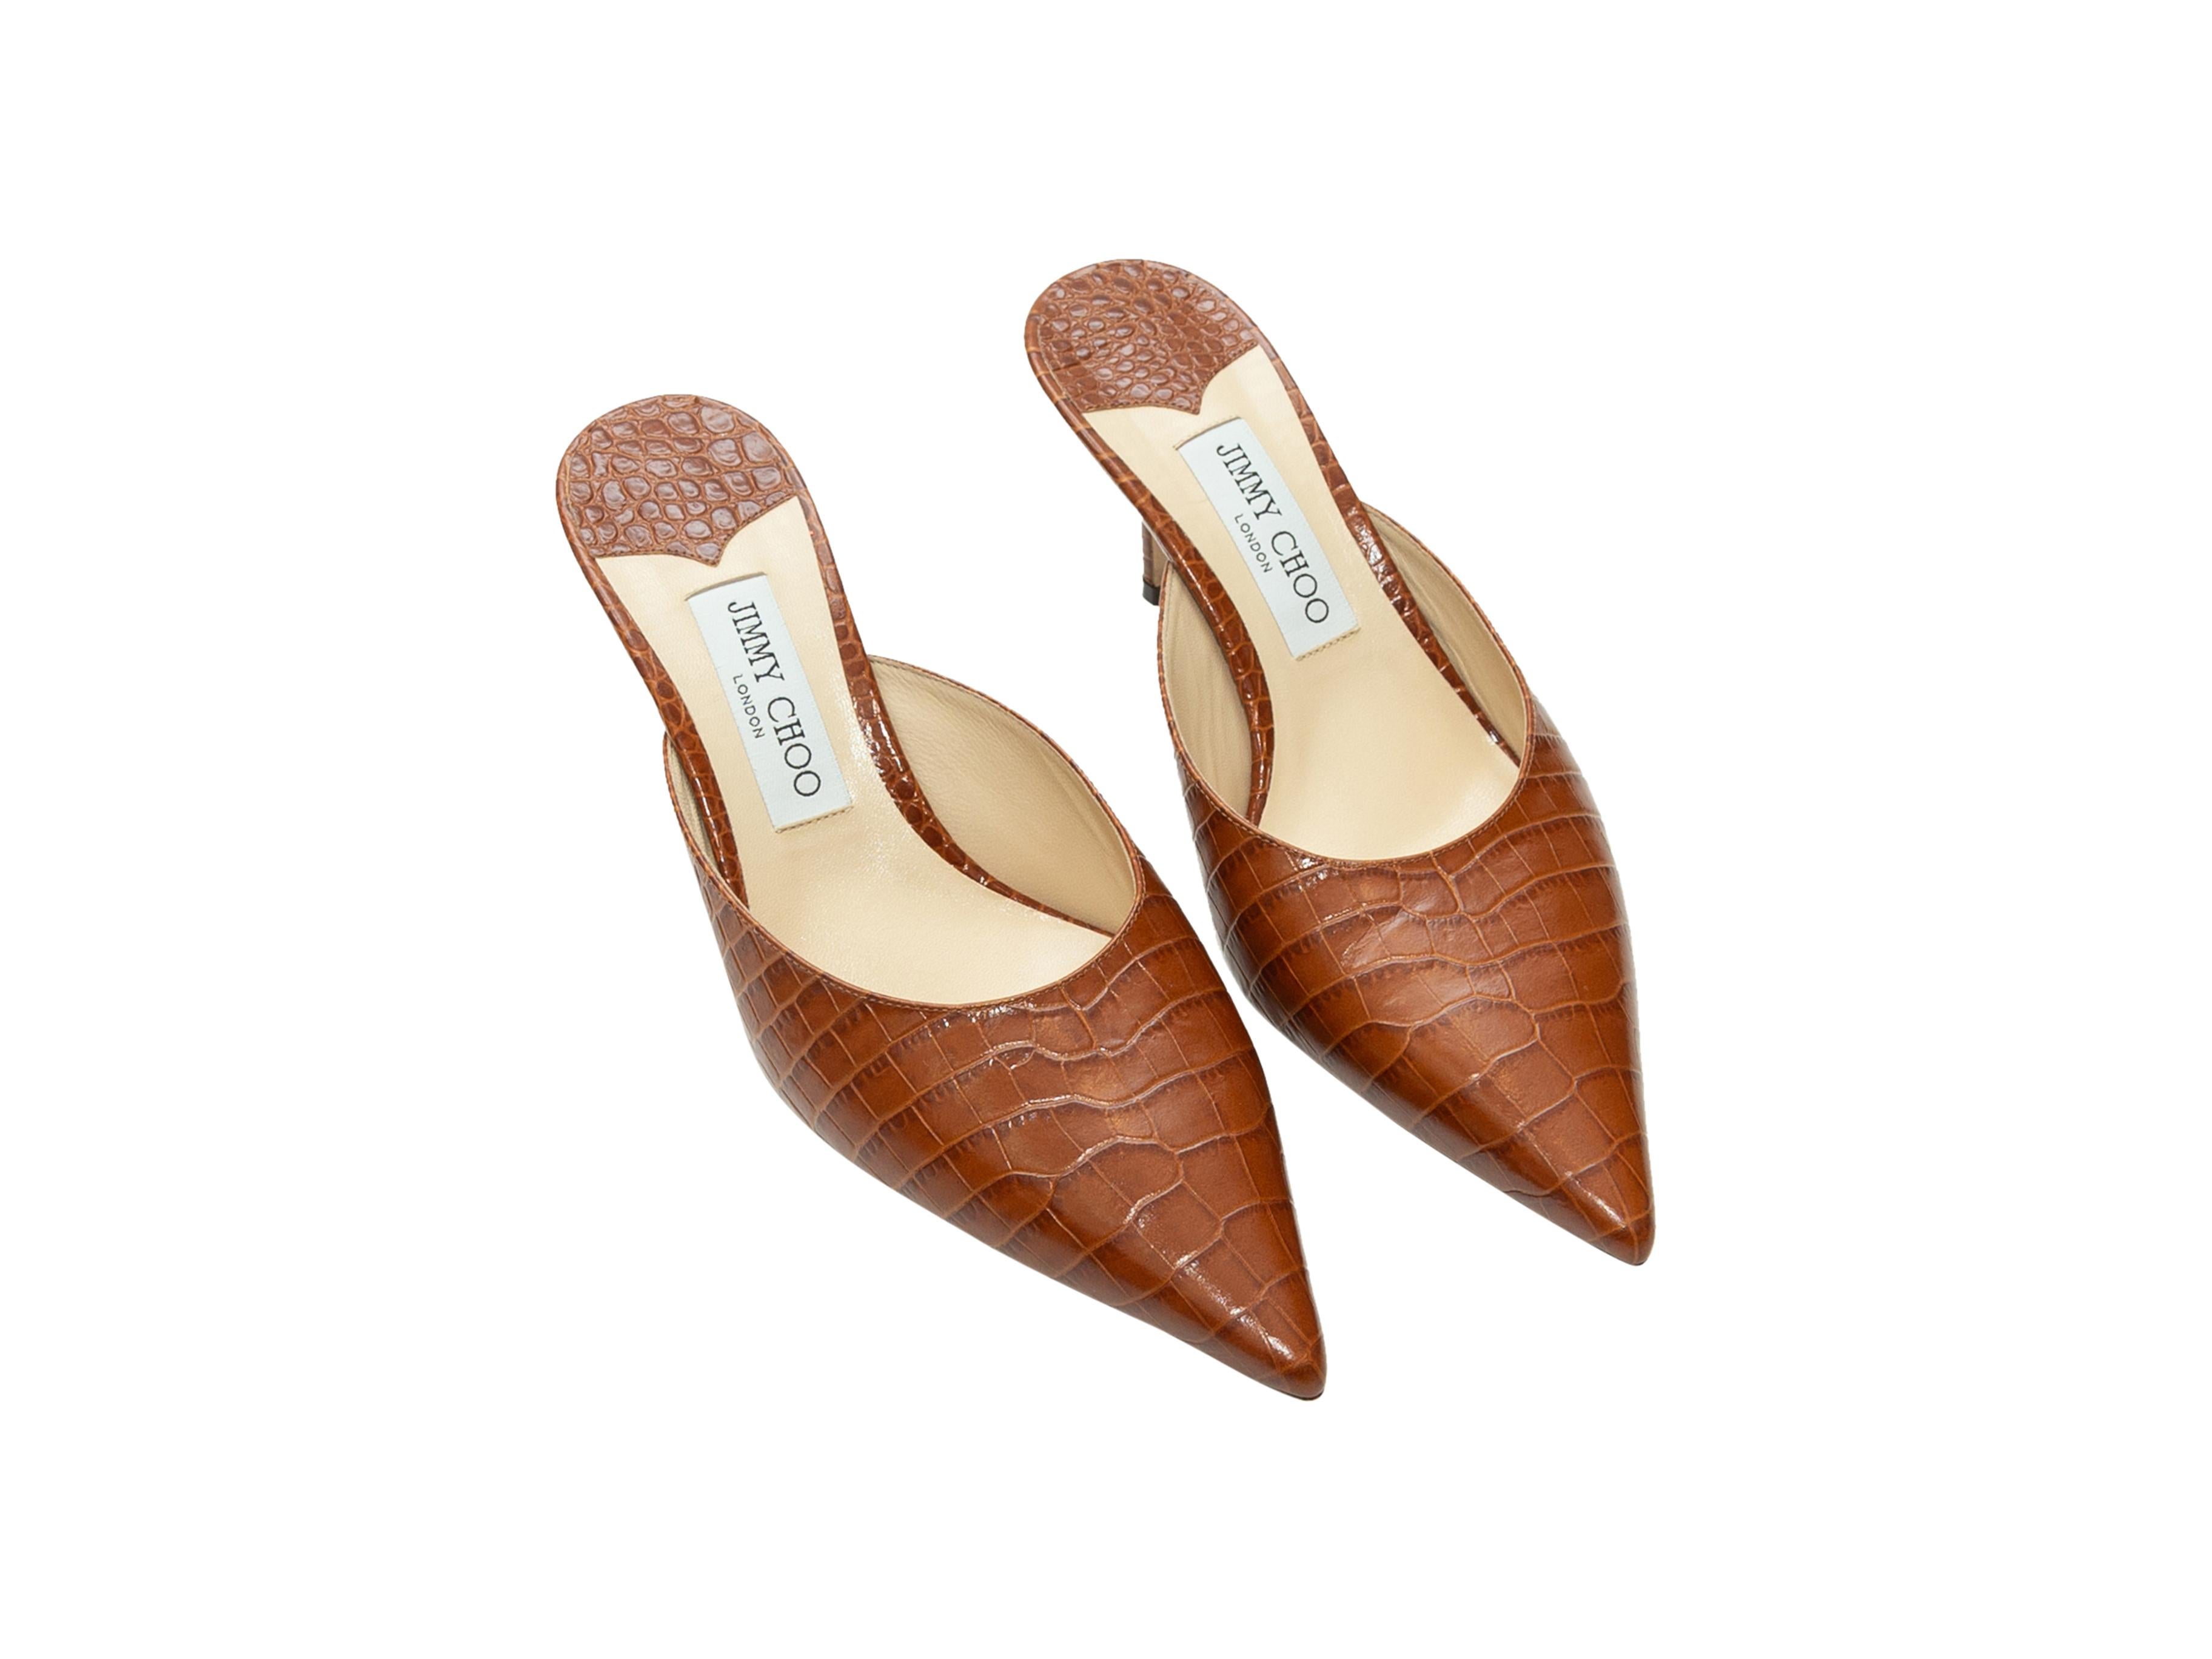 Product details: Brown embossed leather pointed-toe mules by Jimmy Choo. Covered heels. Designer size 40.5. 3